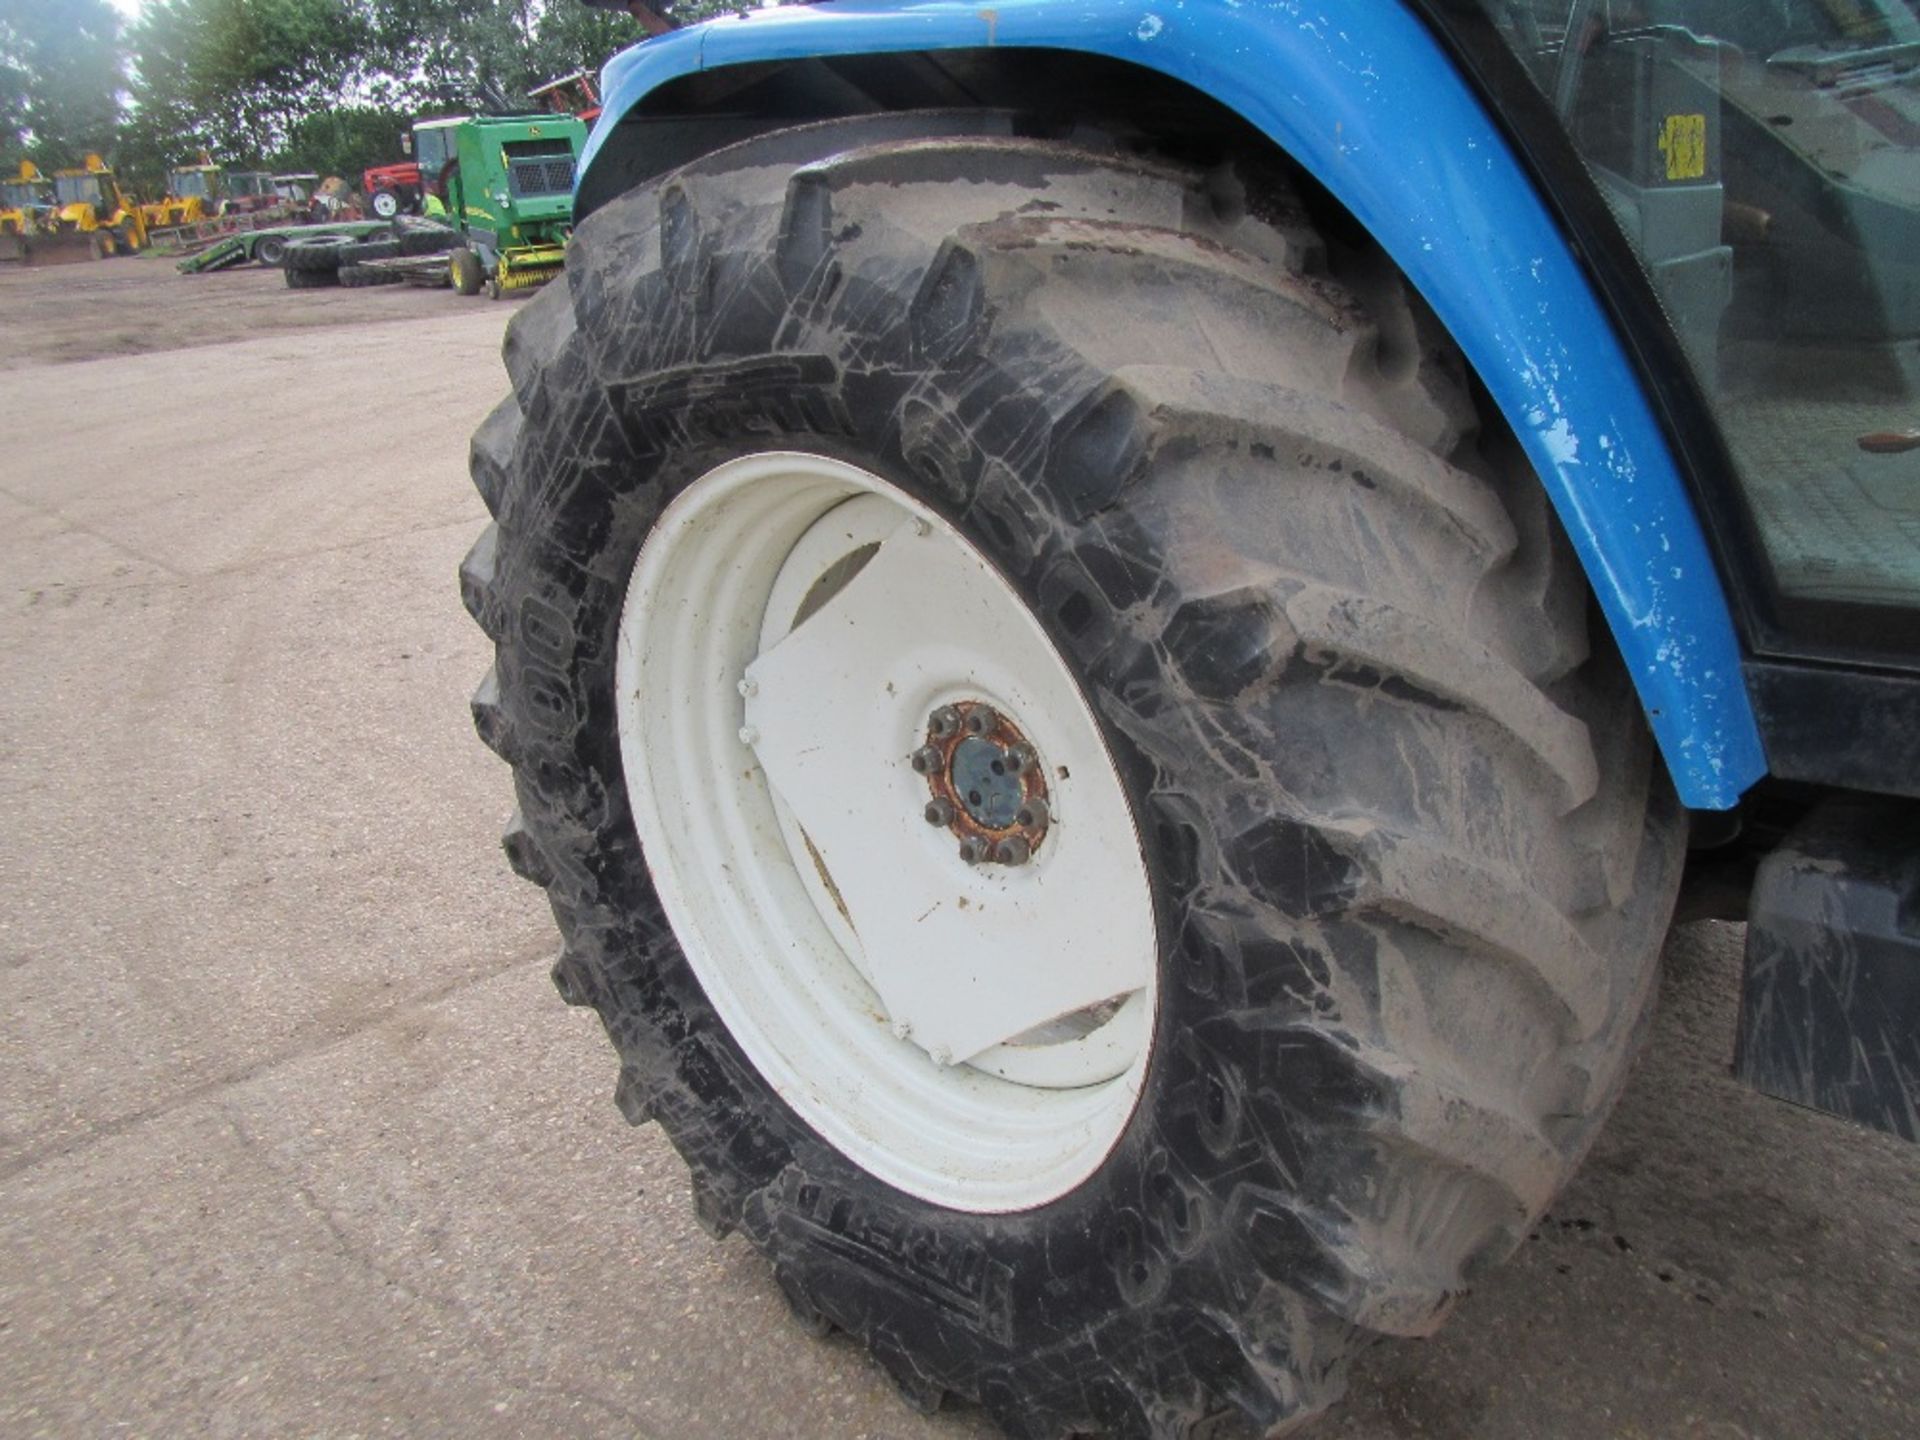 New Holland 8340 SLE 4wd Tractor. Reg. No. N243 SCN Ser. No. 025324B - Image 5 of 20